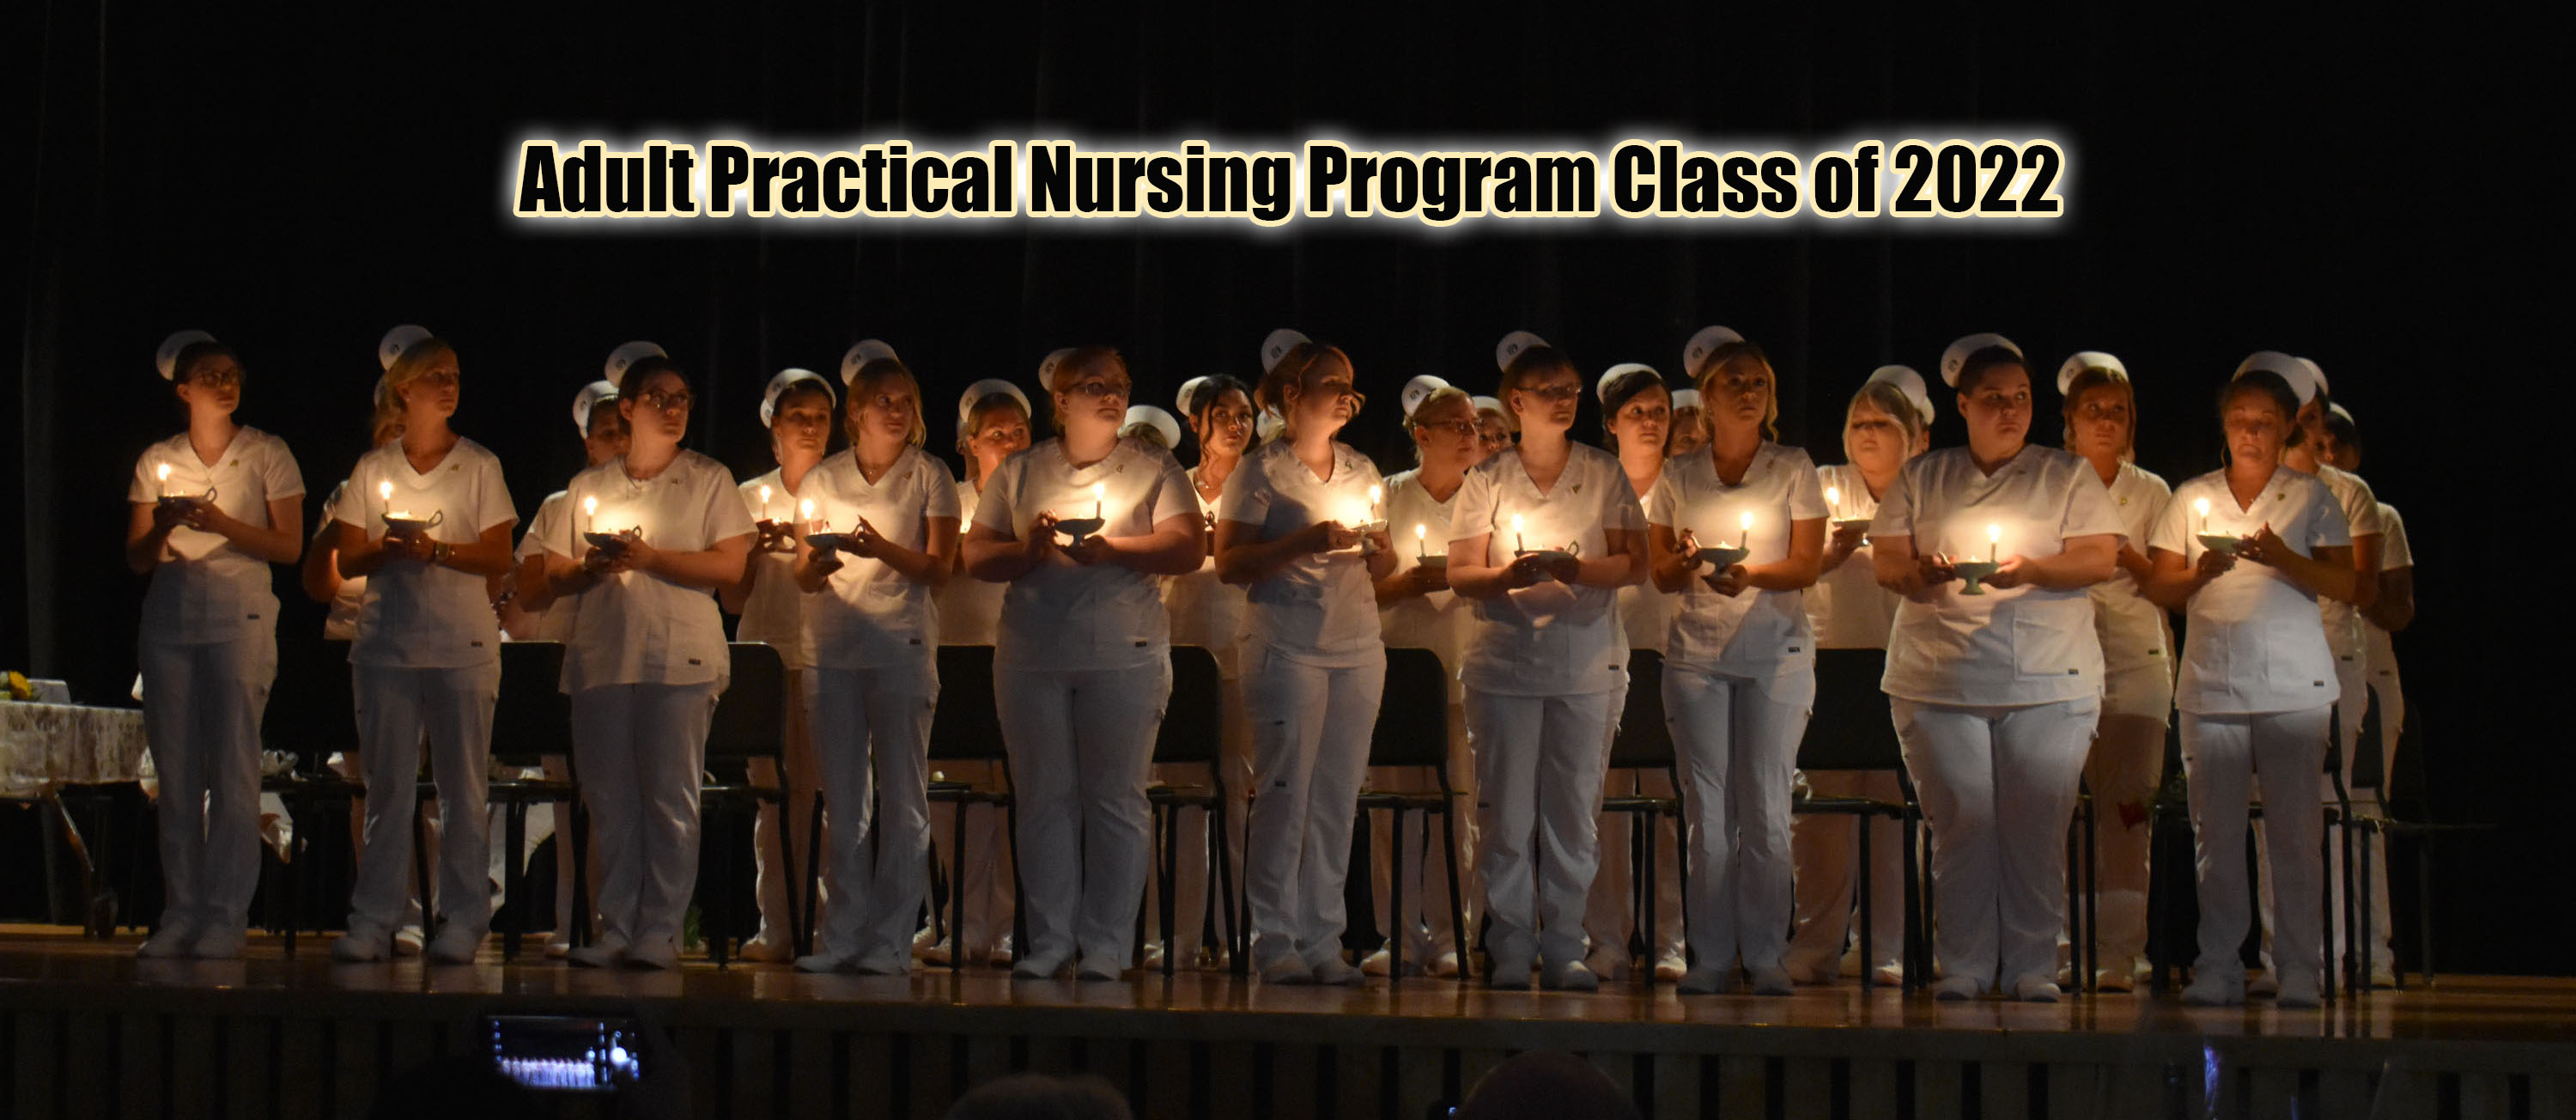 Adult LPN program graduates on stage for candle lighting ceremony